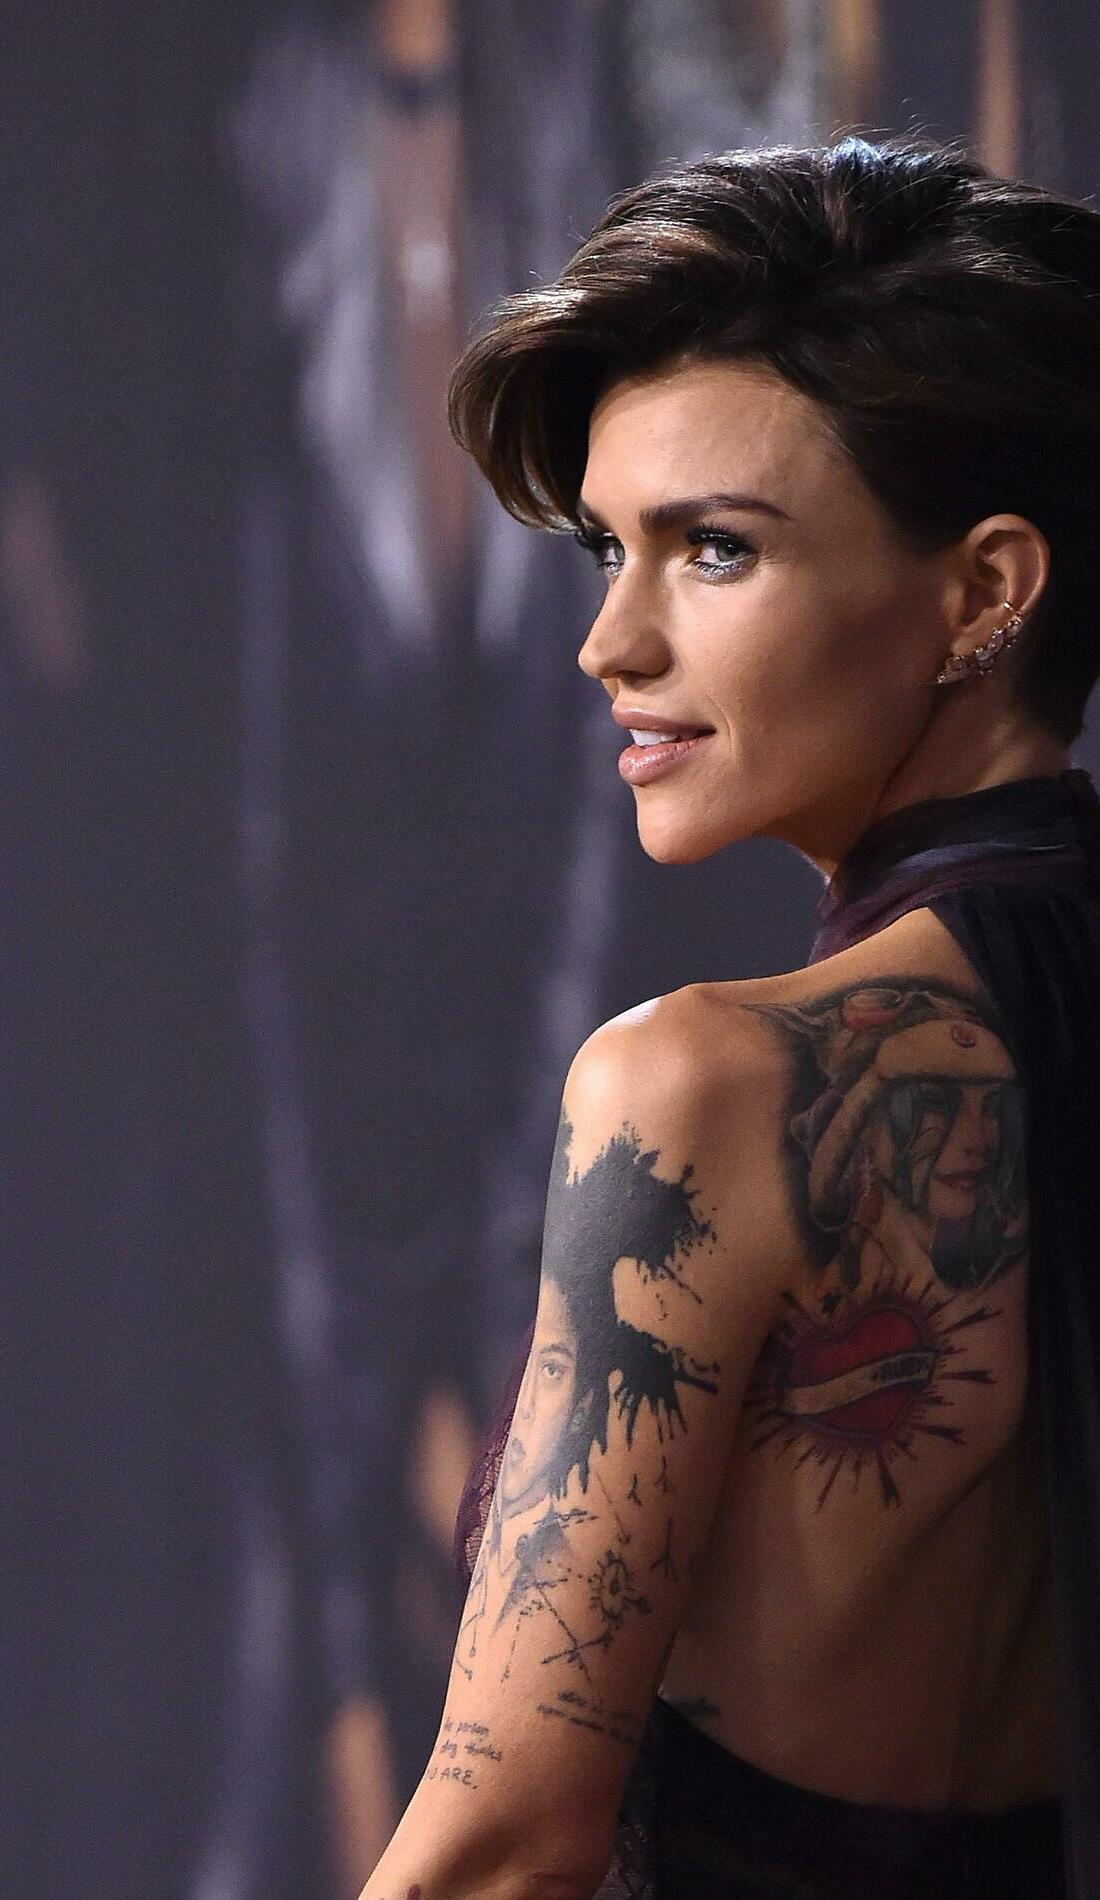 A Ruby Rose live event